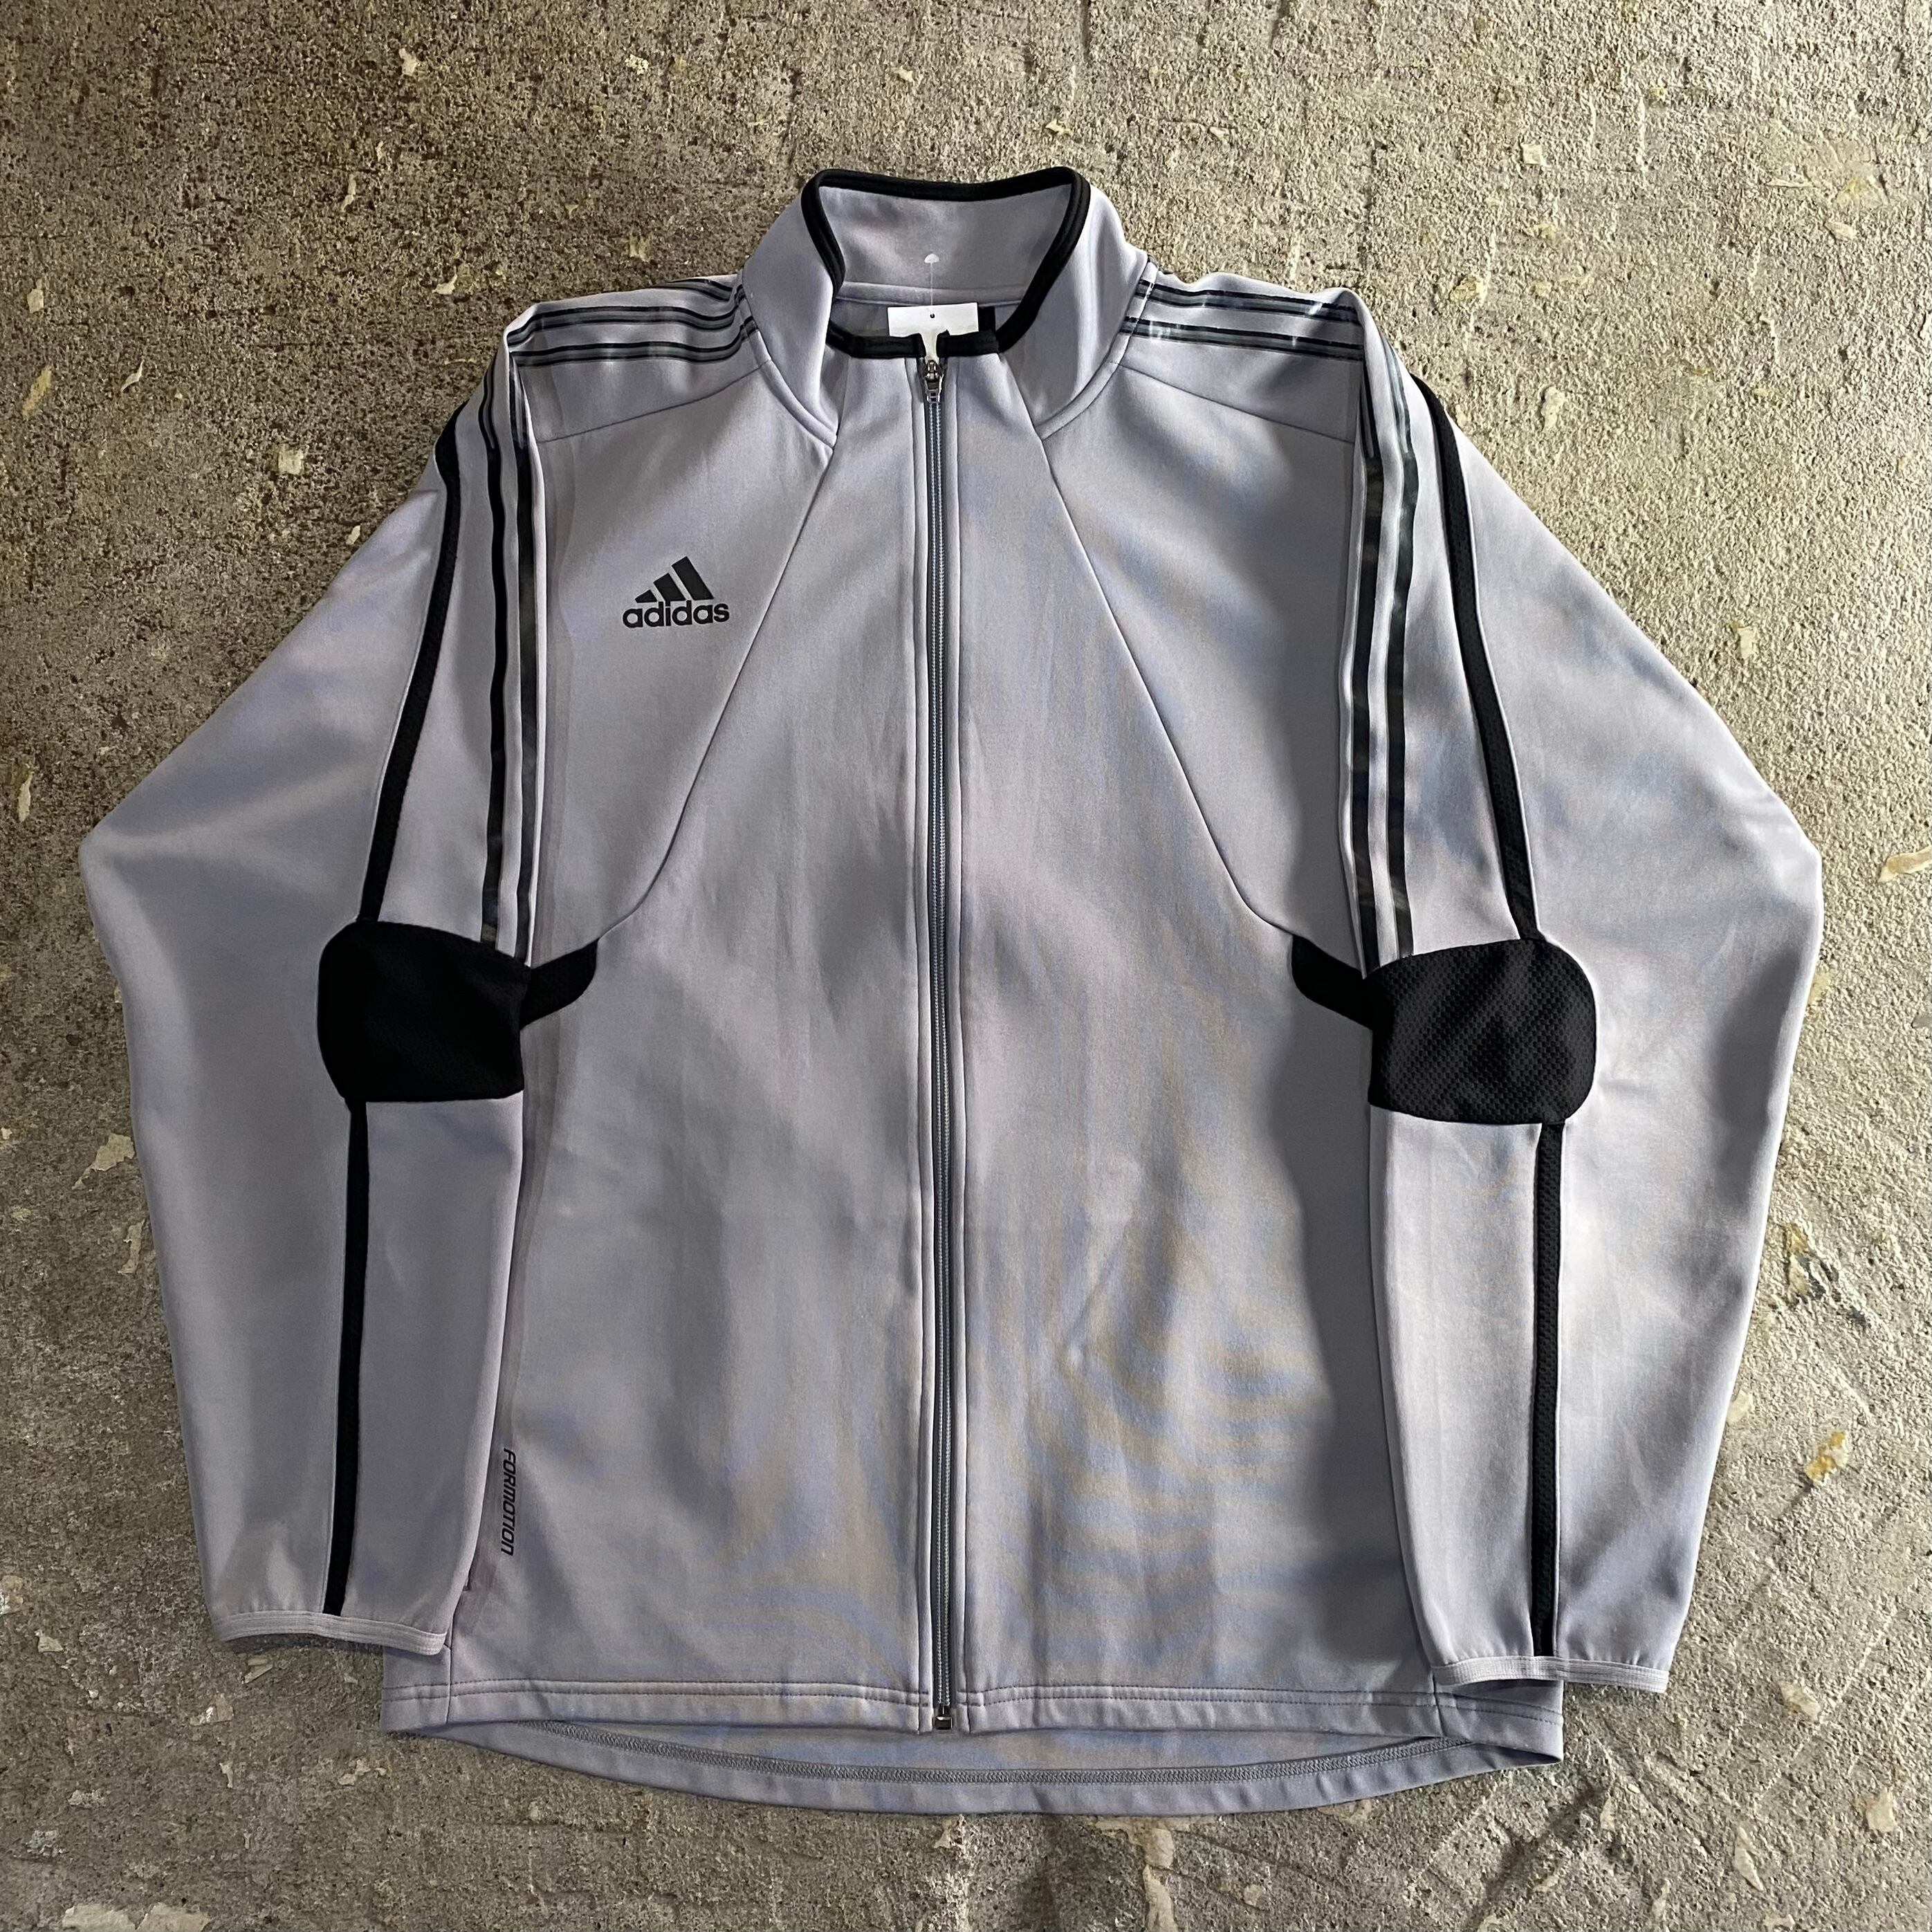 00s adidas "CLIMA COOL" track jacket【仙台店】 | What'z up